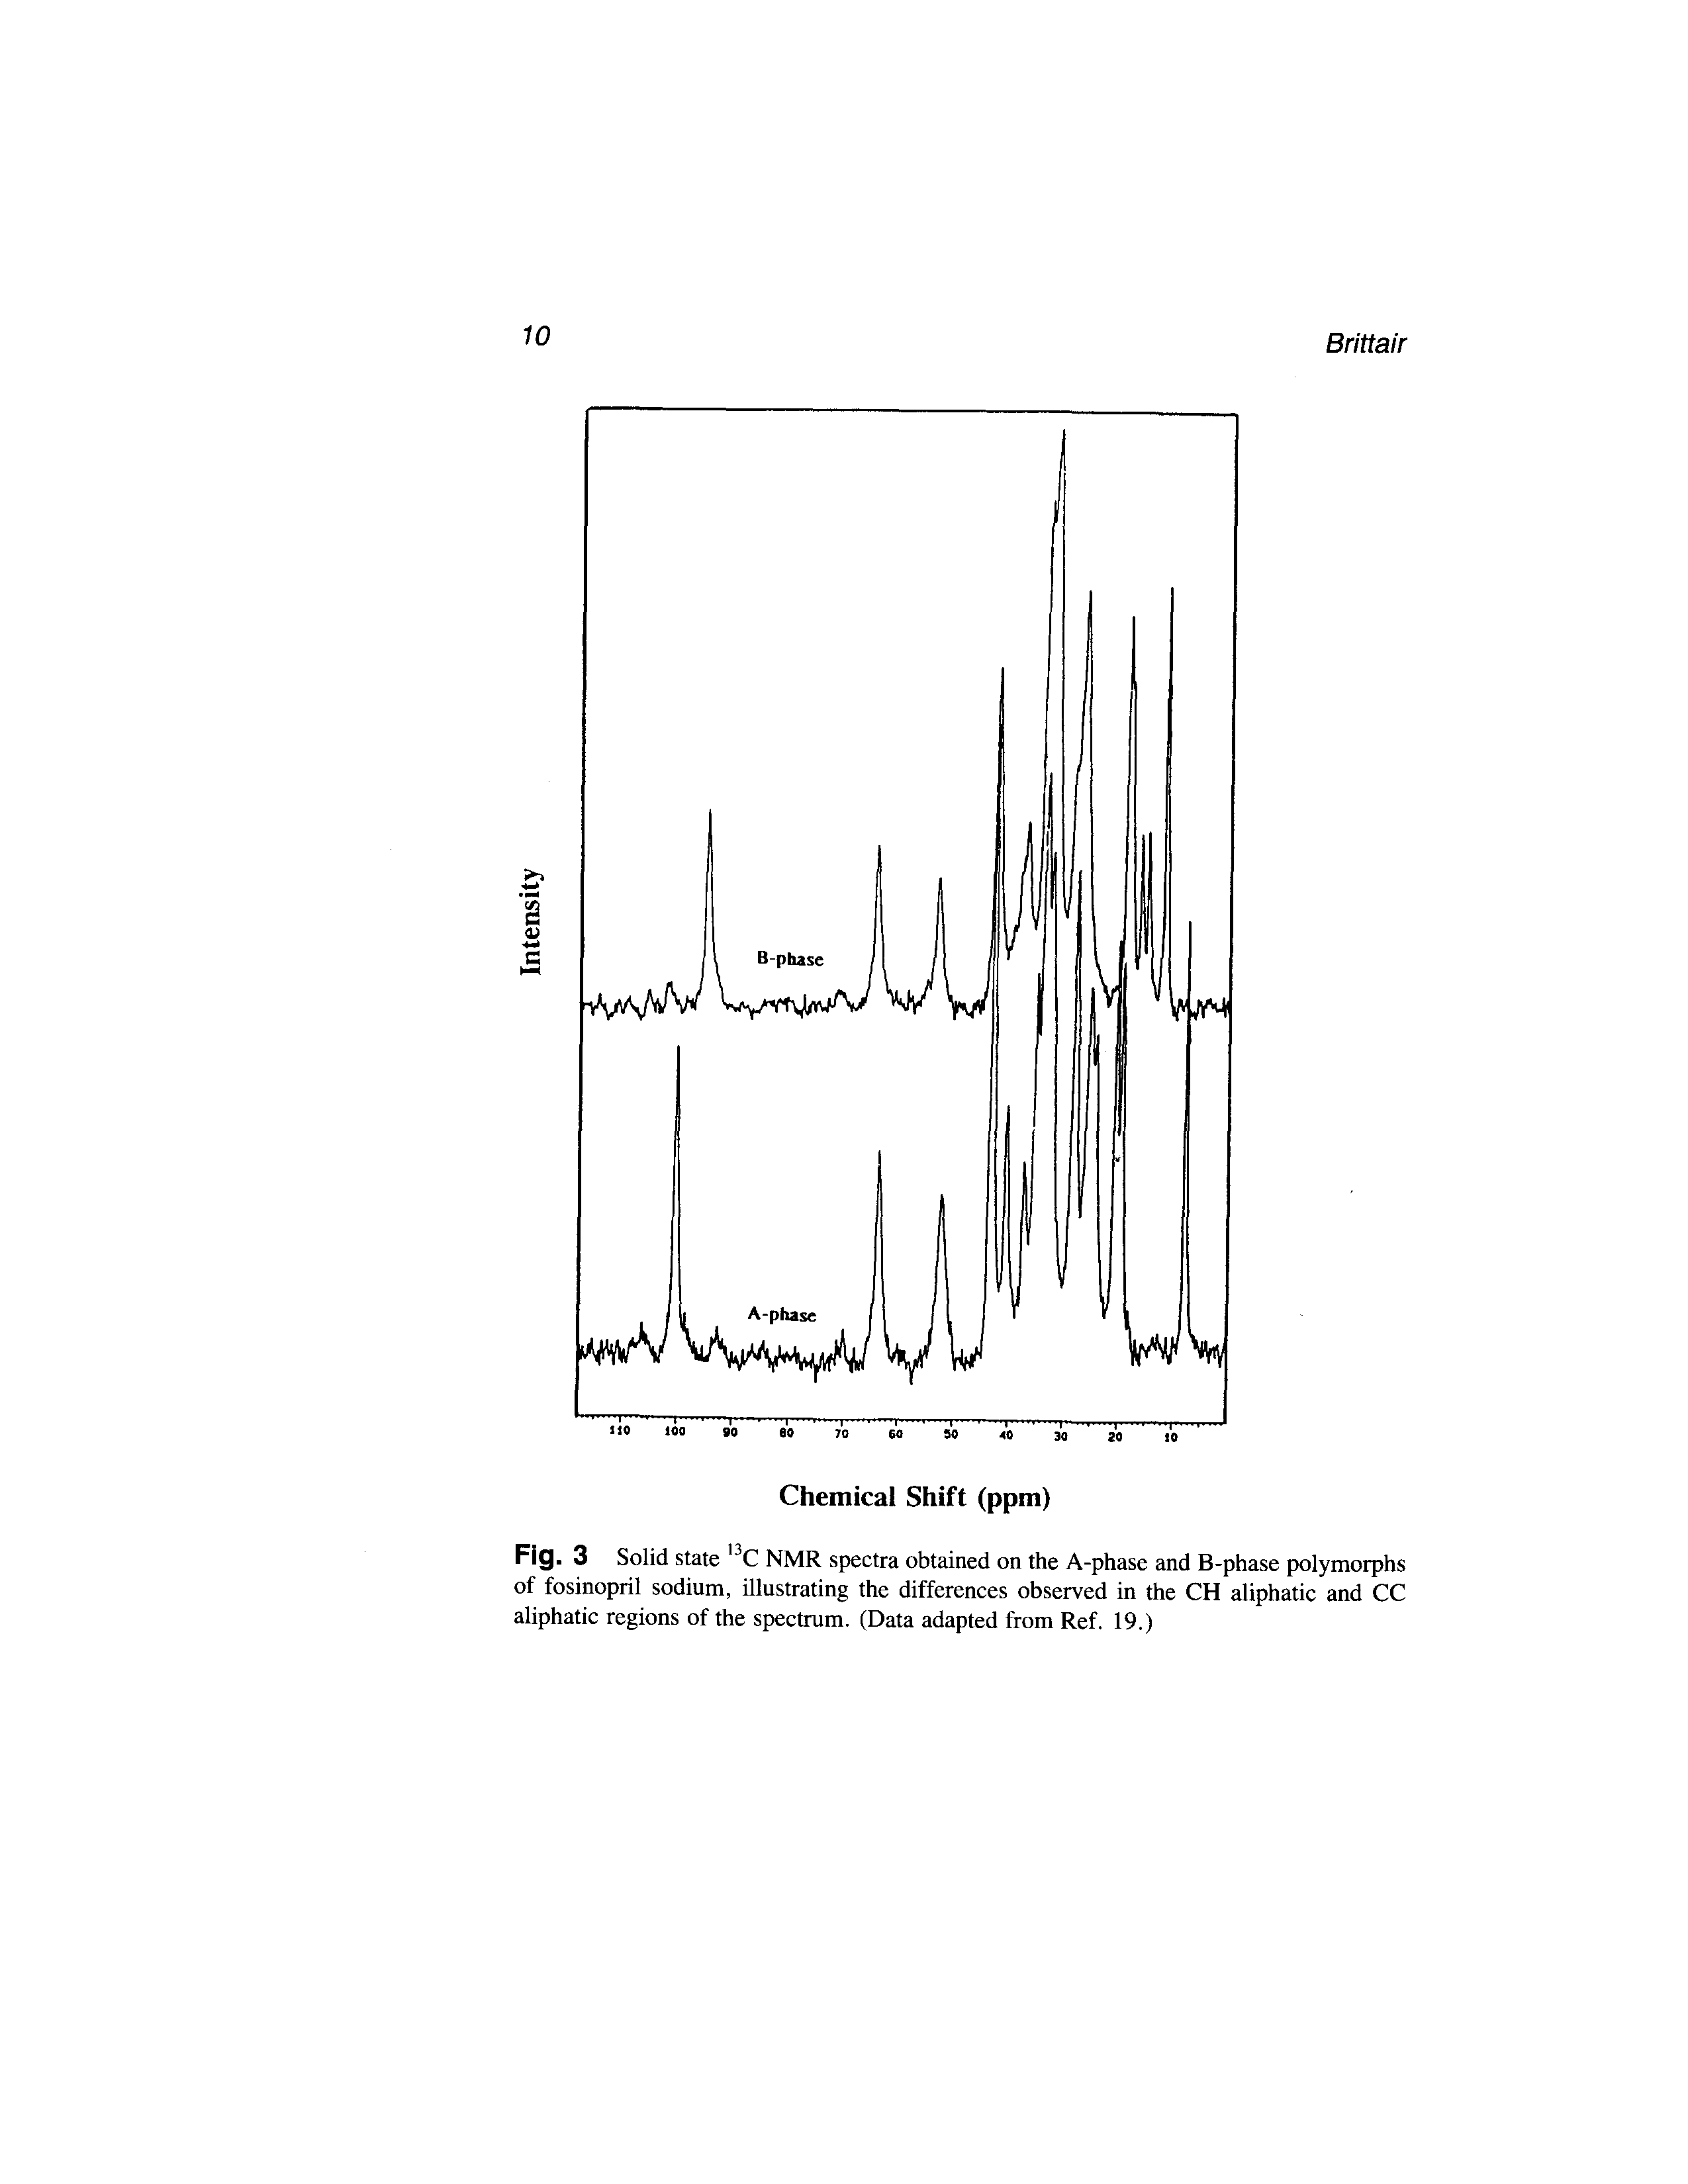 Fig. 3 Solid state 13C NMR spectra obtained on the A-phase and B-phase polymorphs of fosinopril sodium, illustrating the differences observed in the CH aliphatic and CC aliphatic regions of the spectrum. (Data adapted from Ref. 19.)...